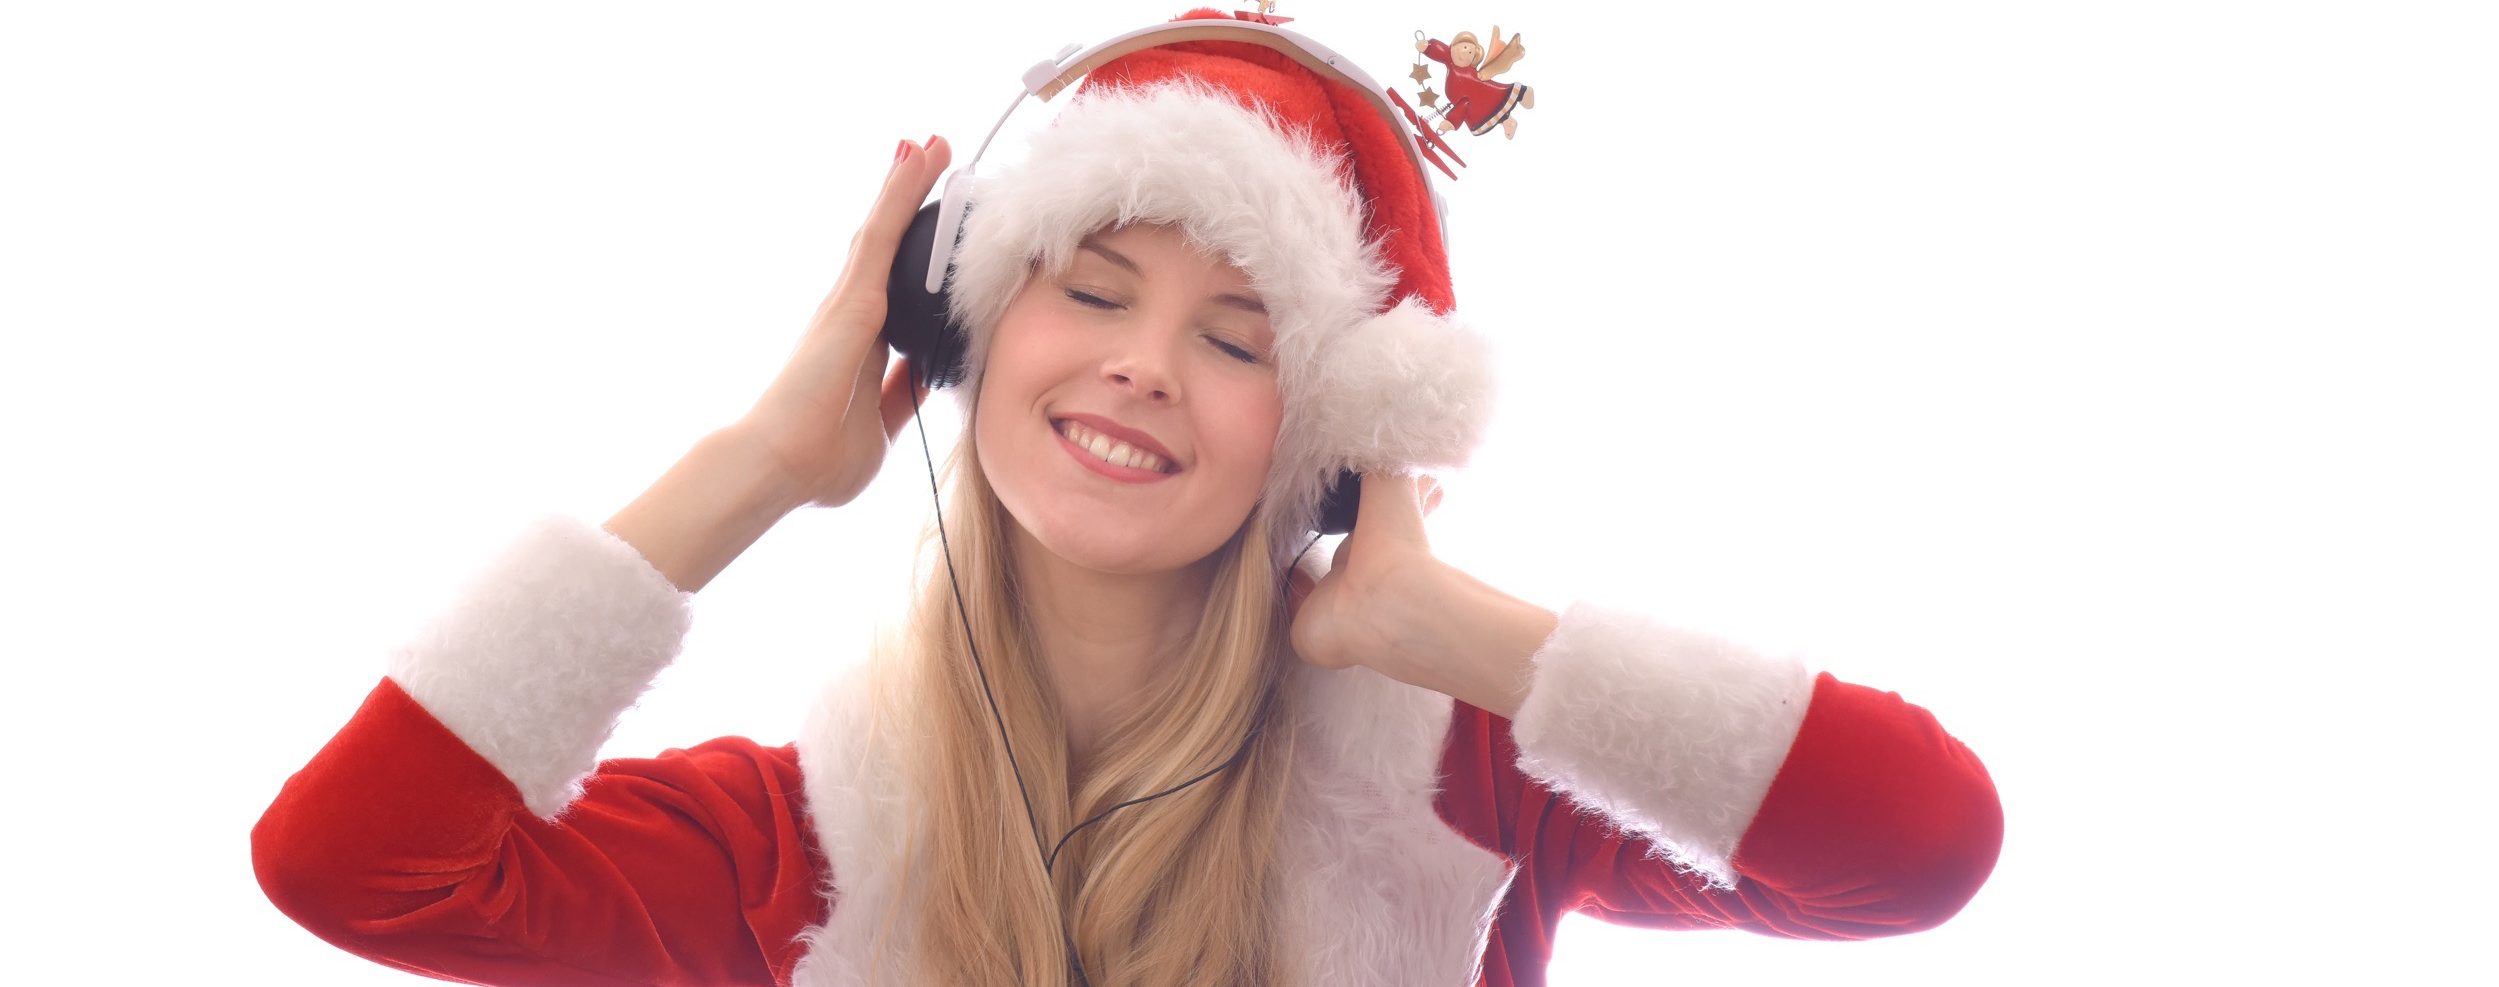 The 10 Best Christmas Songs, According to an Ex-Record Producer